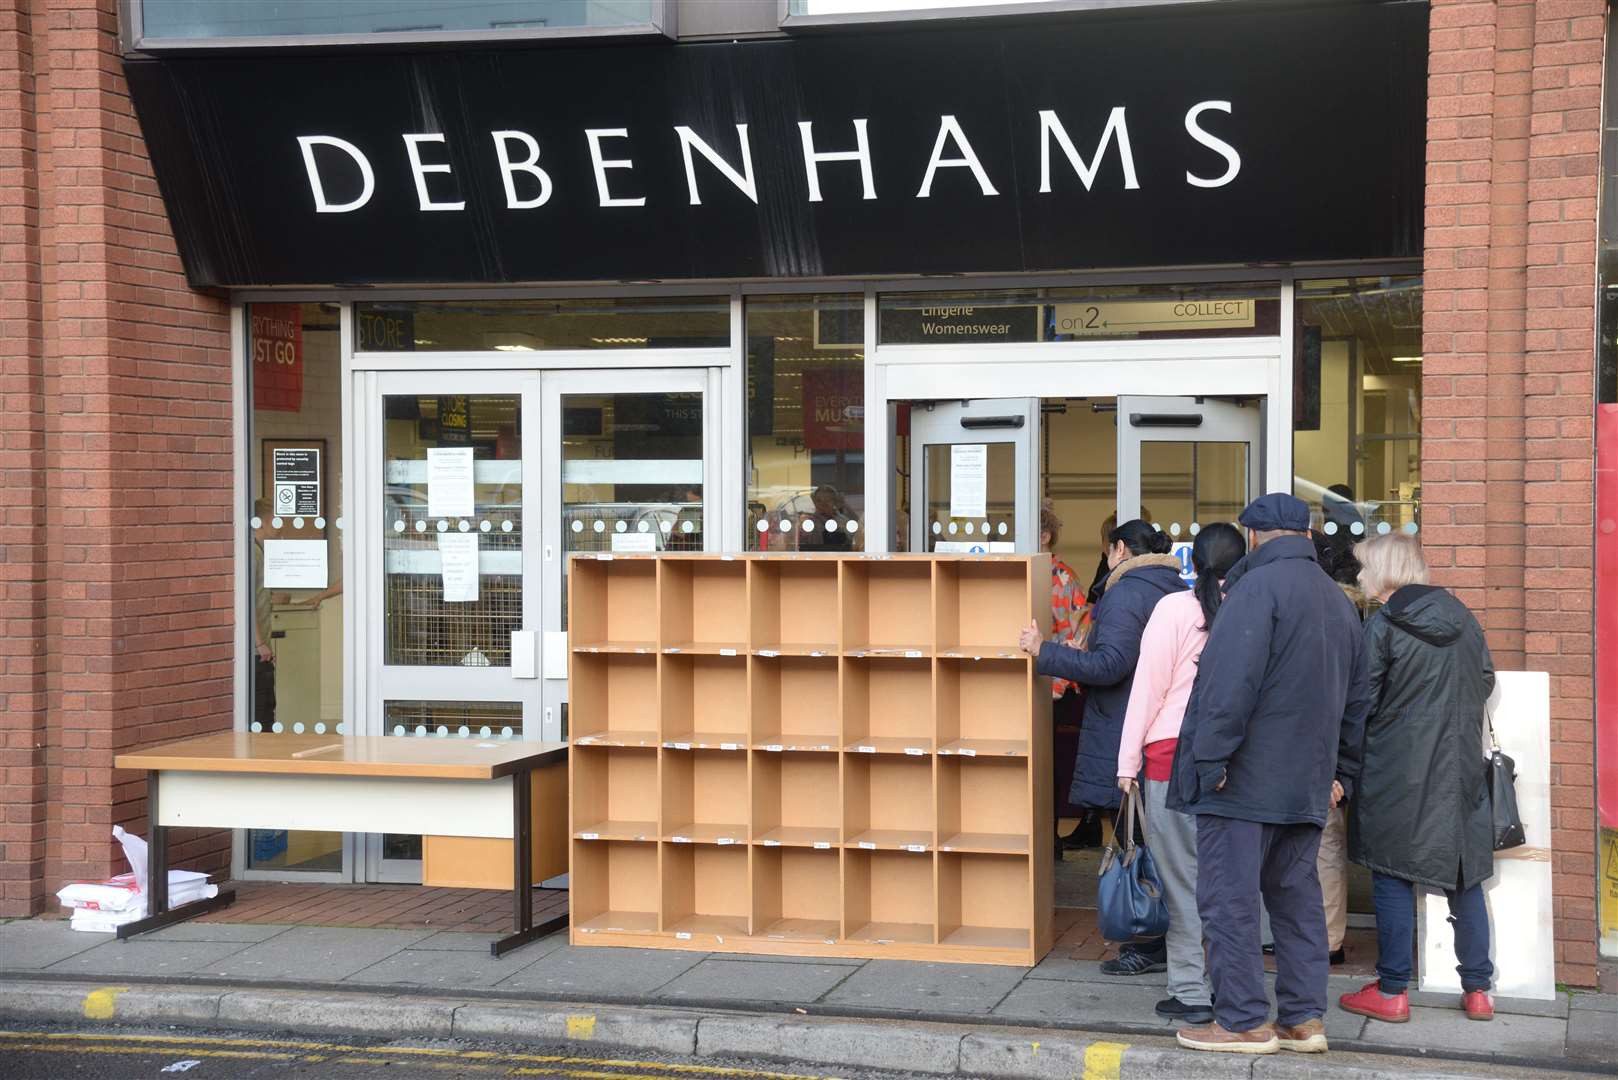 The Debenhams in Chatham was closed down in January 2020